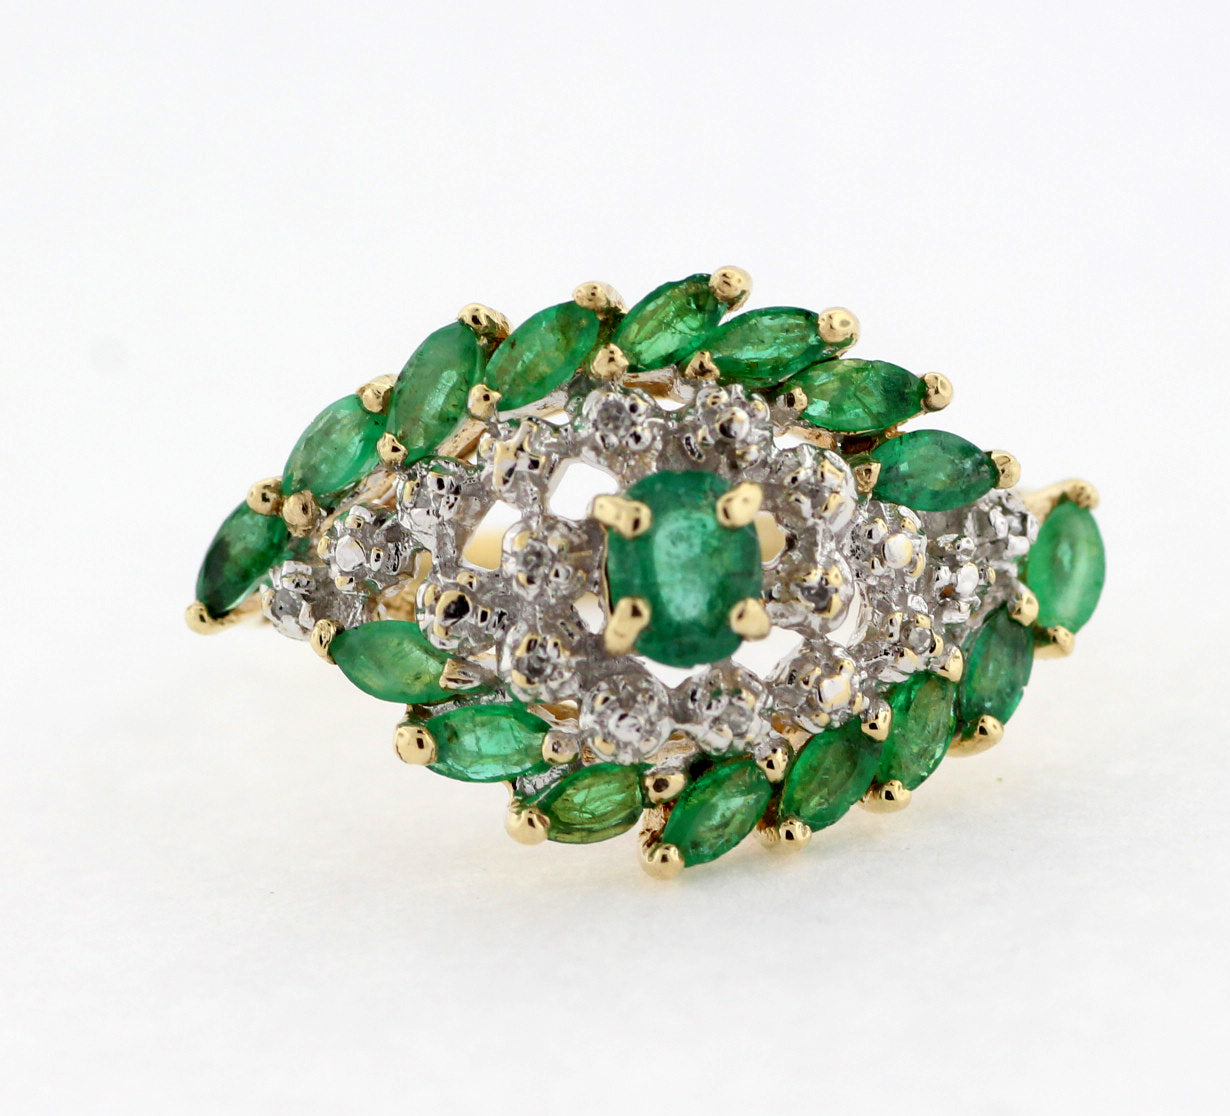 ESTATE 10KY 1.68 CTTW EMERALD AND DIAMOND RING .08 CTTW